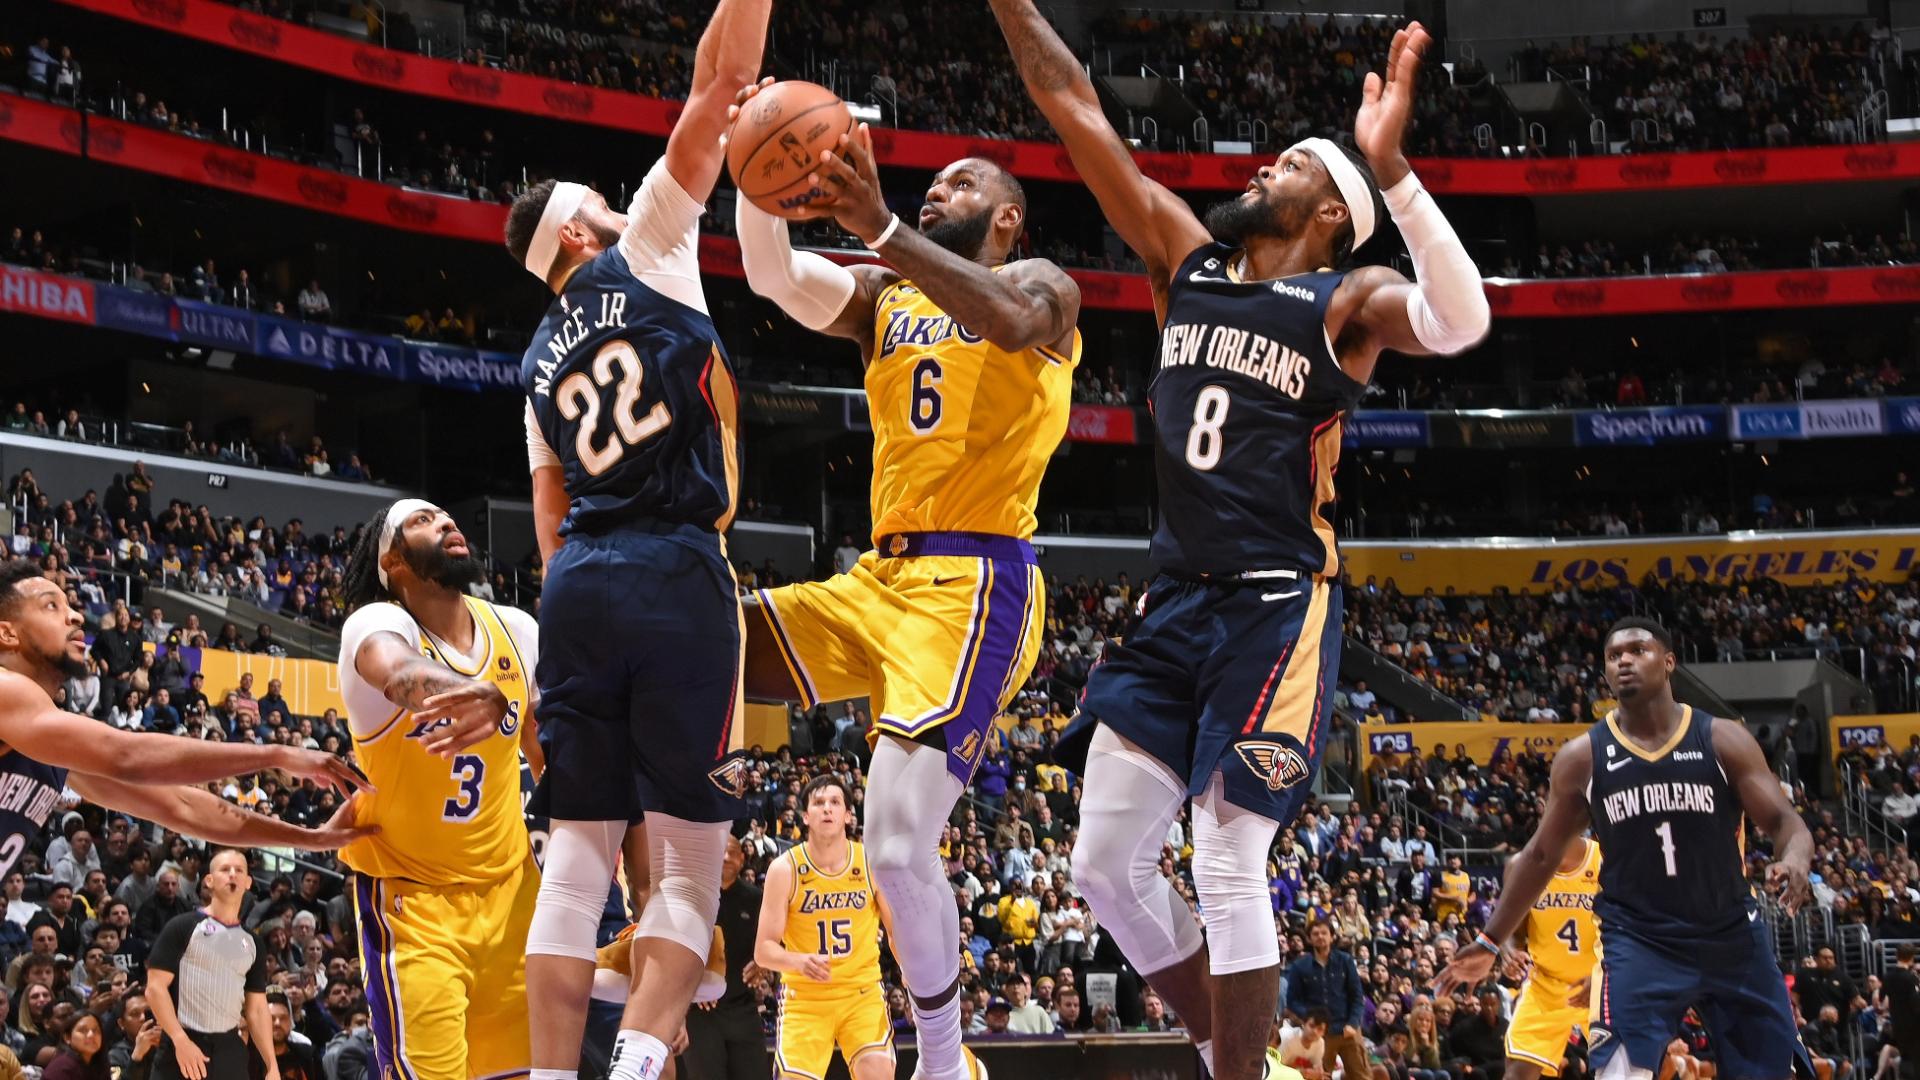 Ryan forces OT, Lakers rally for 120-117 win over Pelicans